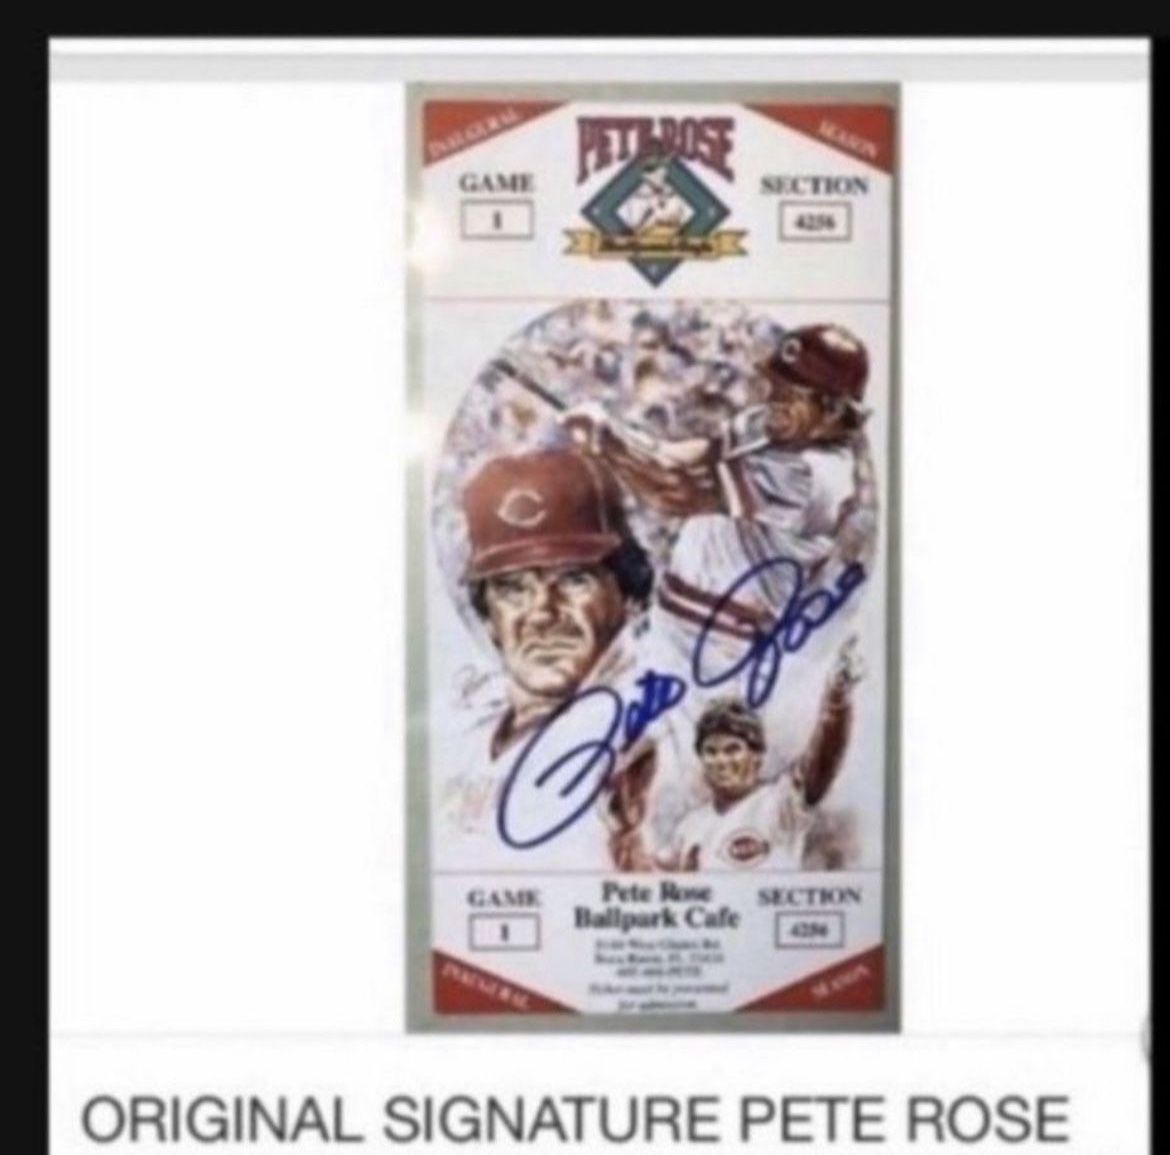 Pete Rose Signed Ticket